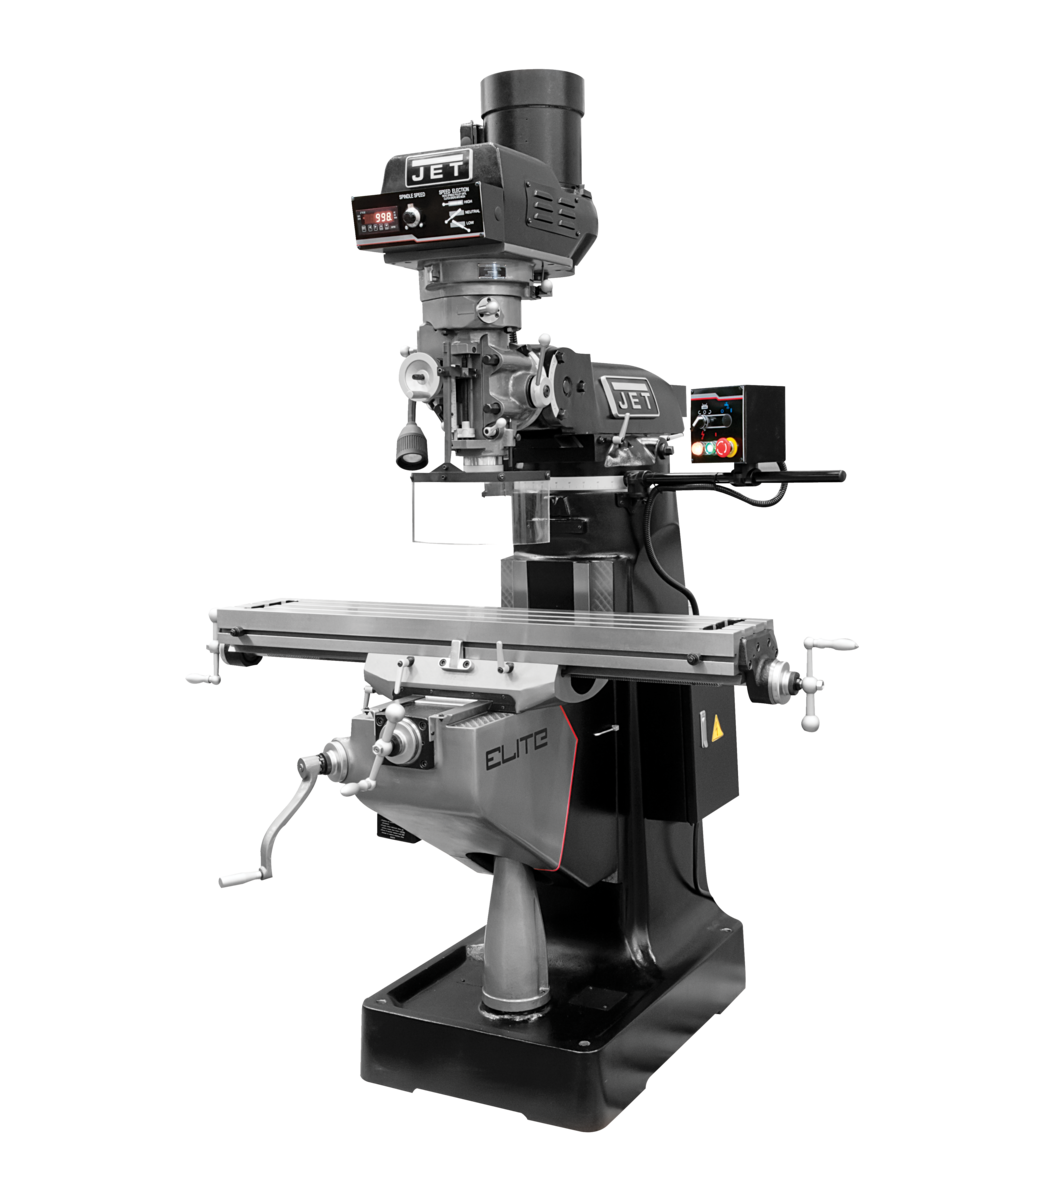 EVS-949 Mill with 3-Axis Newall DP700 (Knee) DRO and Servo X, Y, Z-Axis Powerfeeds and USA Air Powered Draw Bar